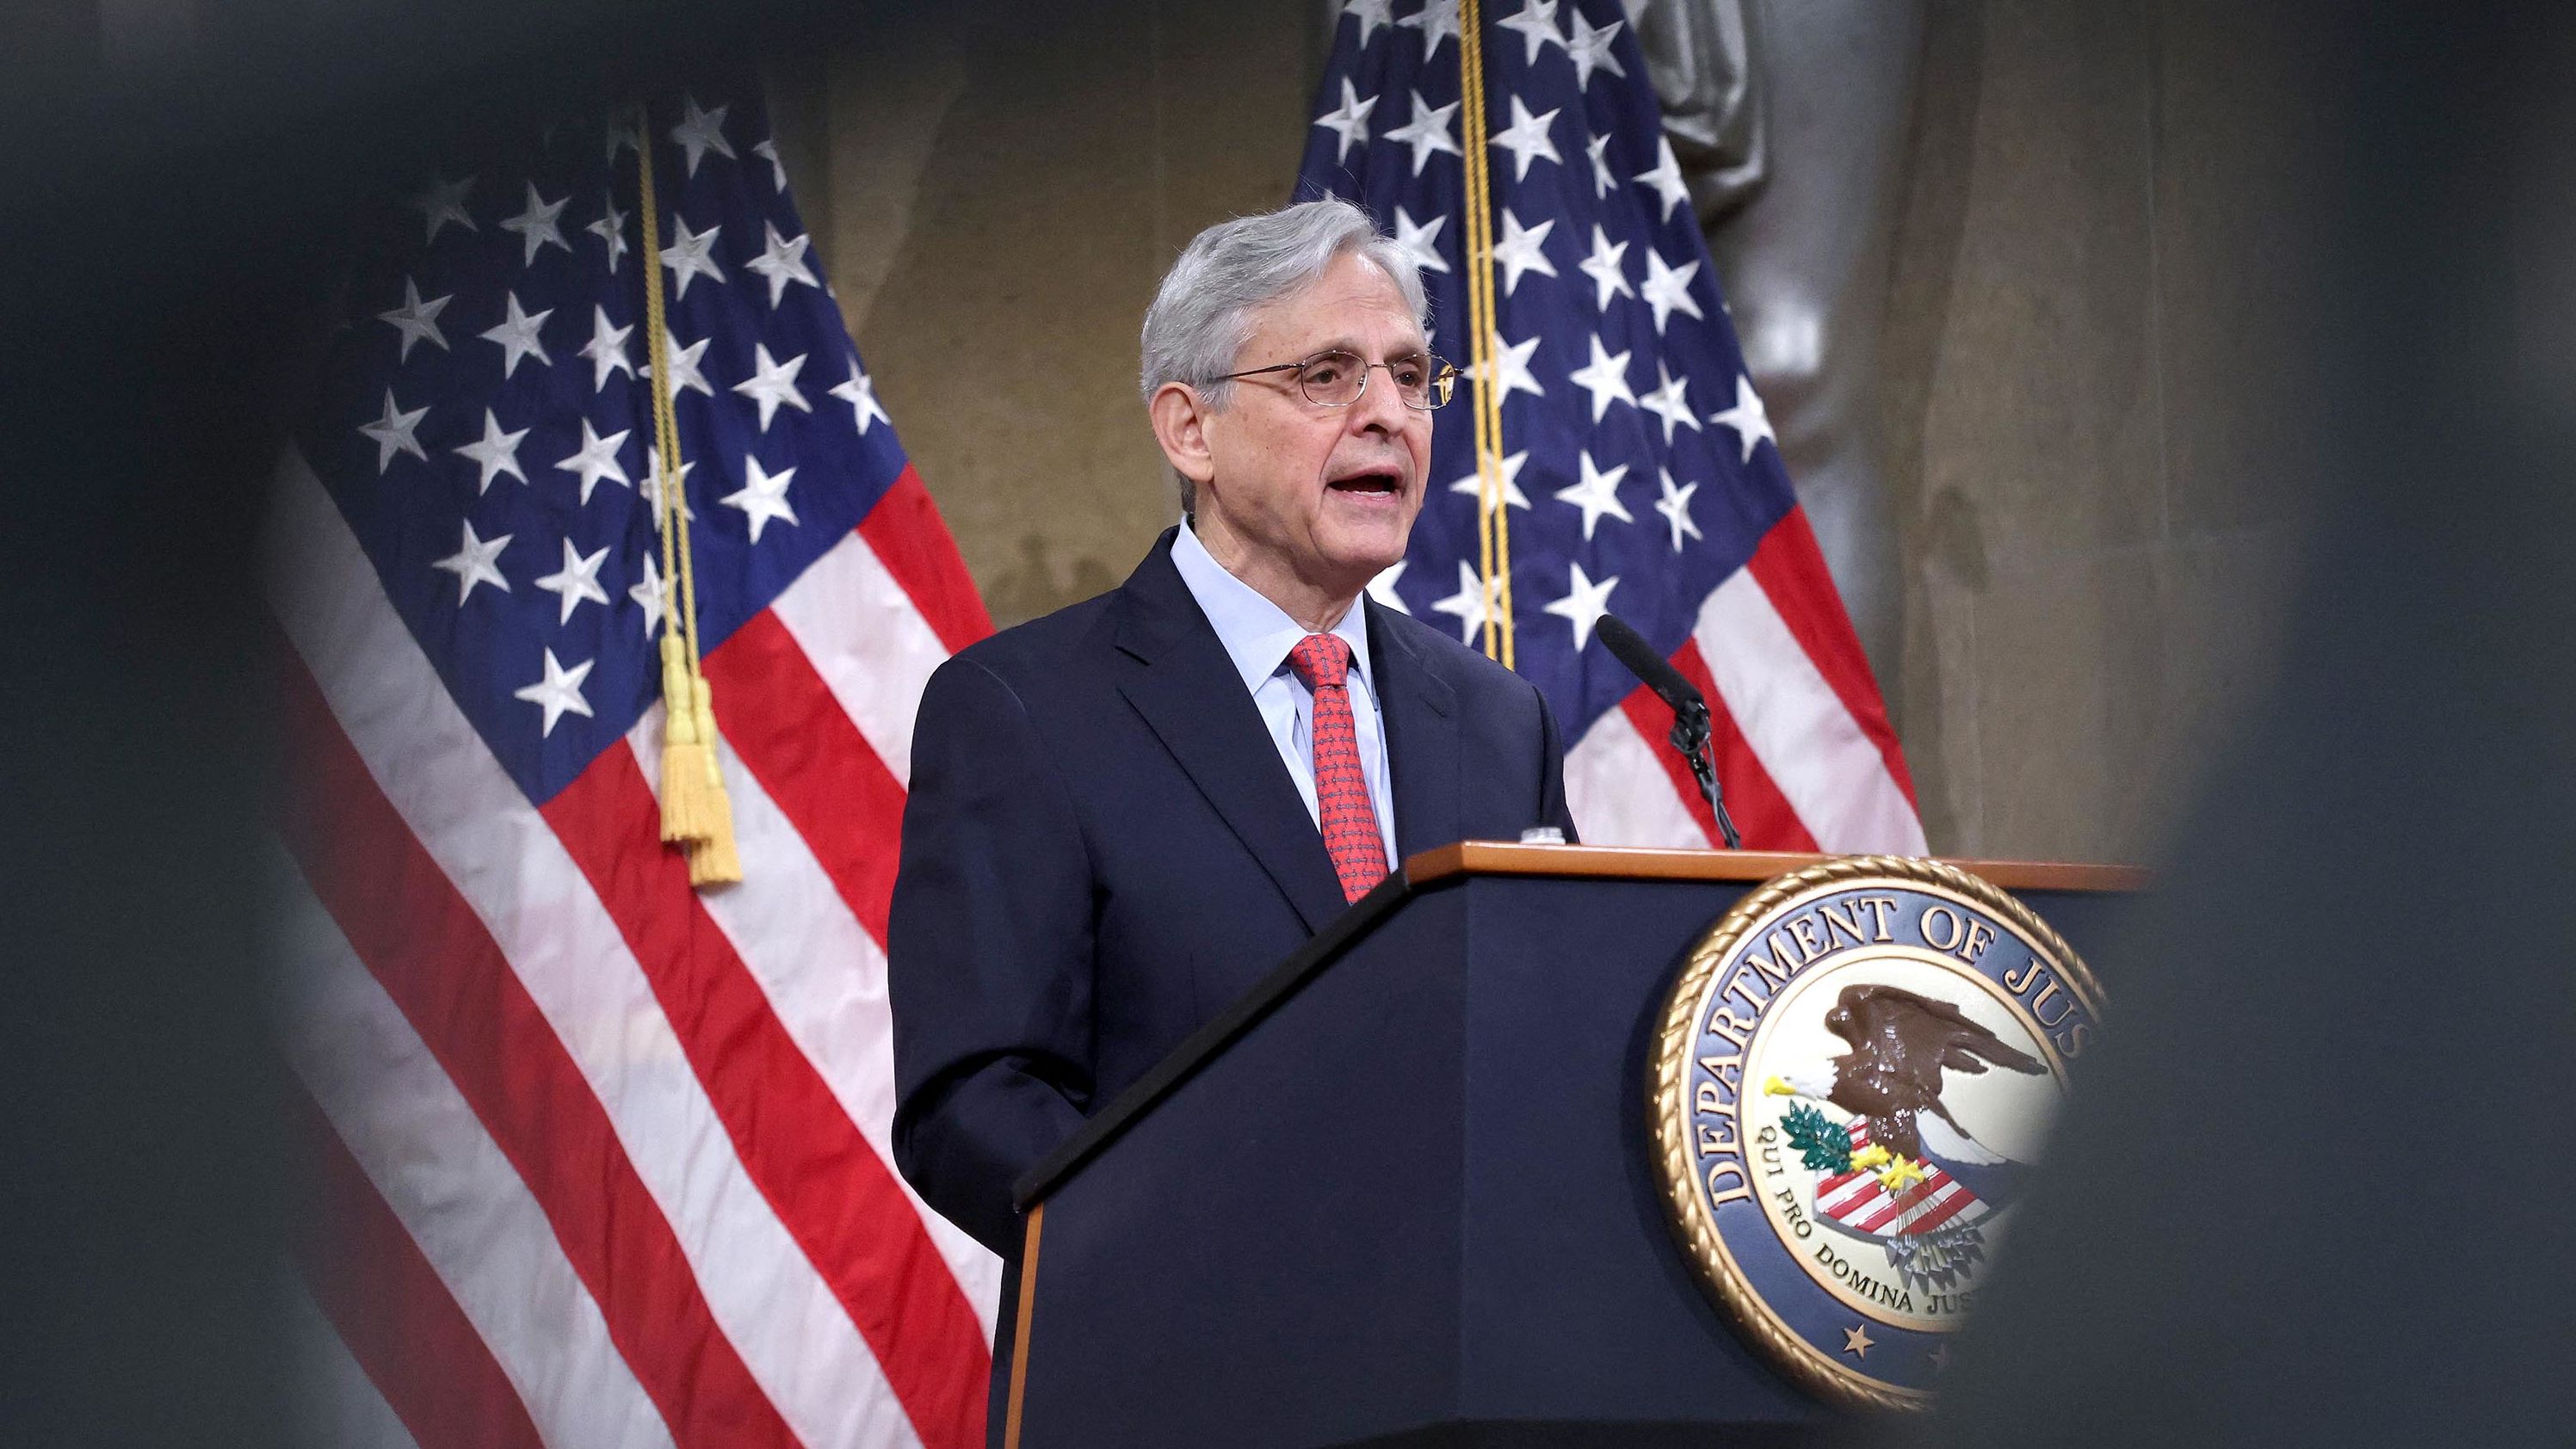 US Attorney General Merrick Garland speaks during an event at the Justice Department on June 15, 2021, in Washington.